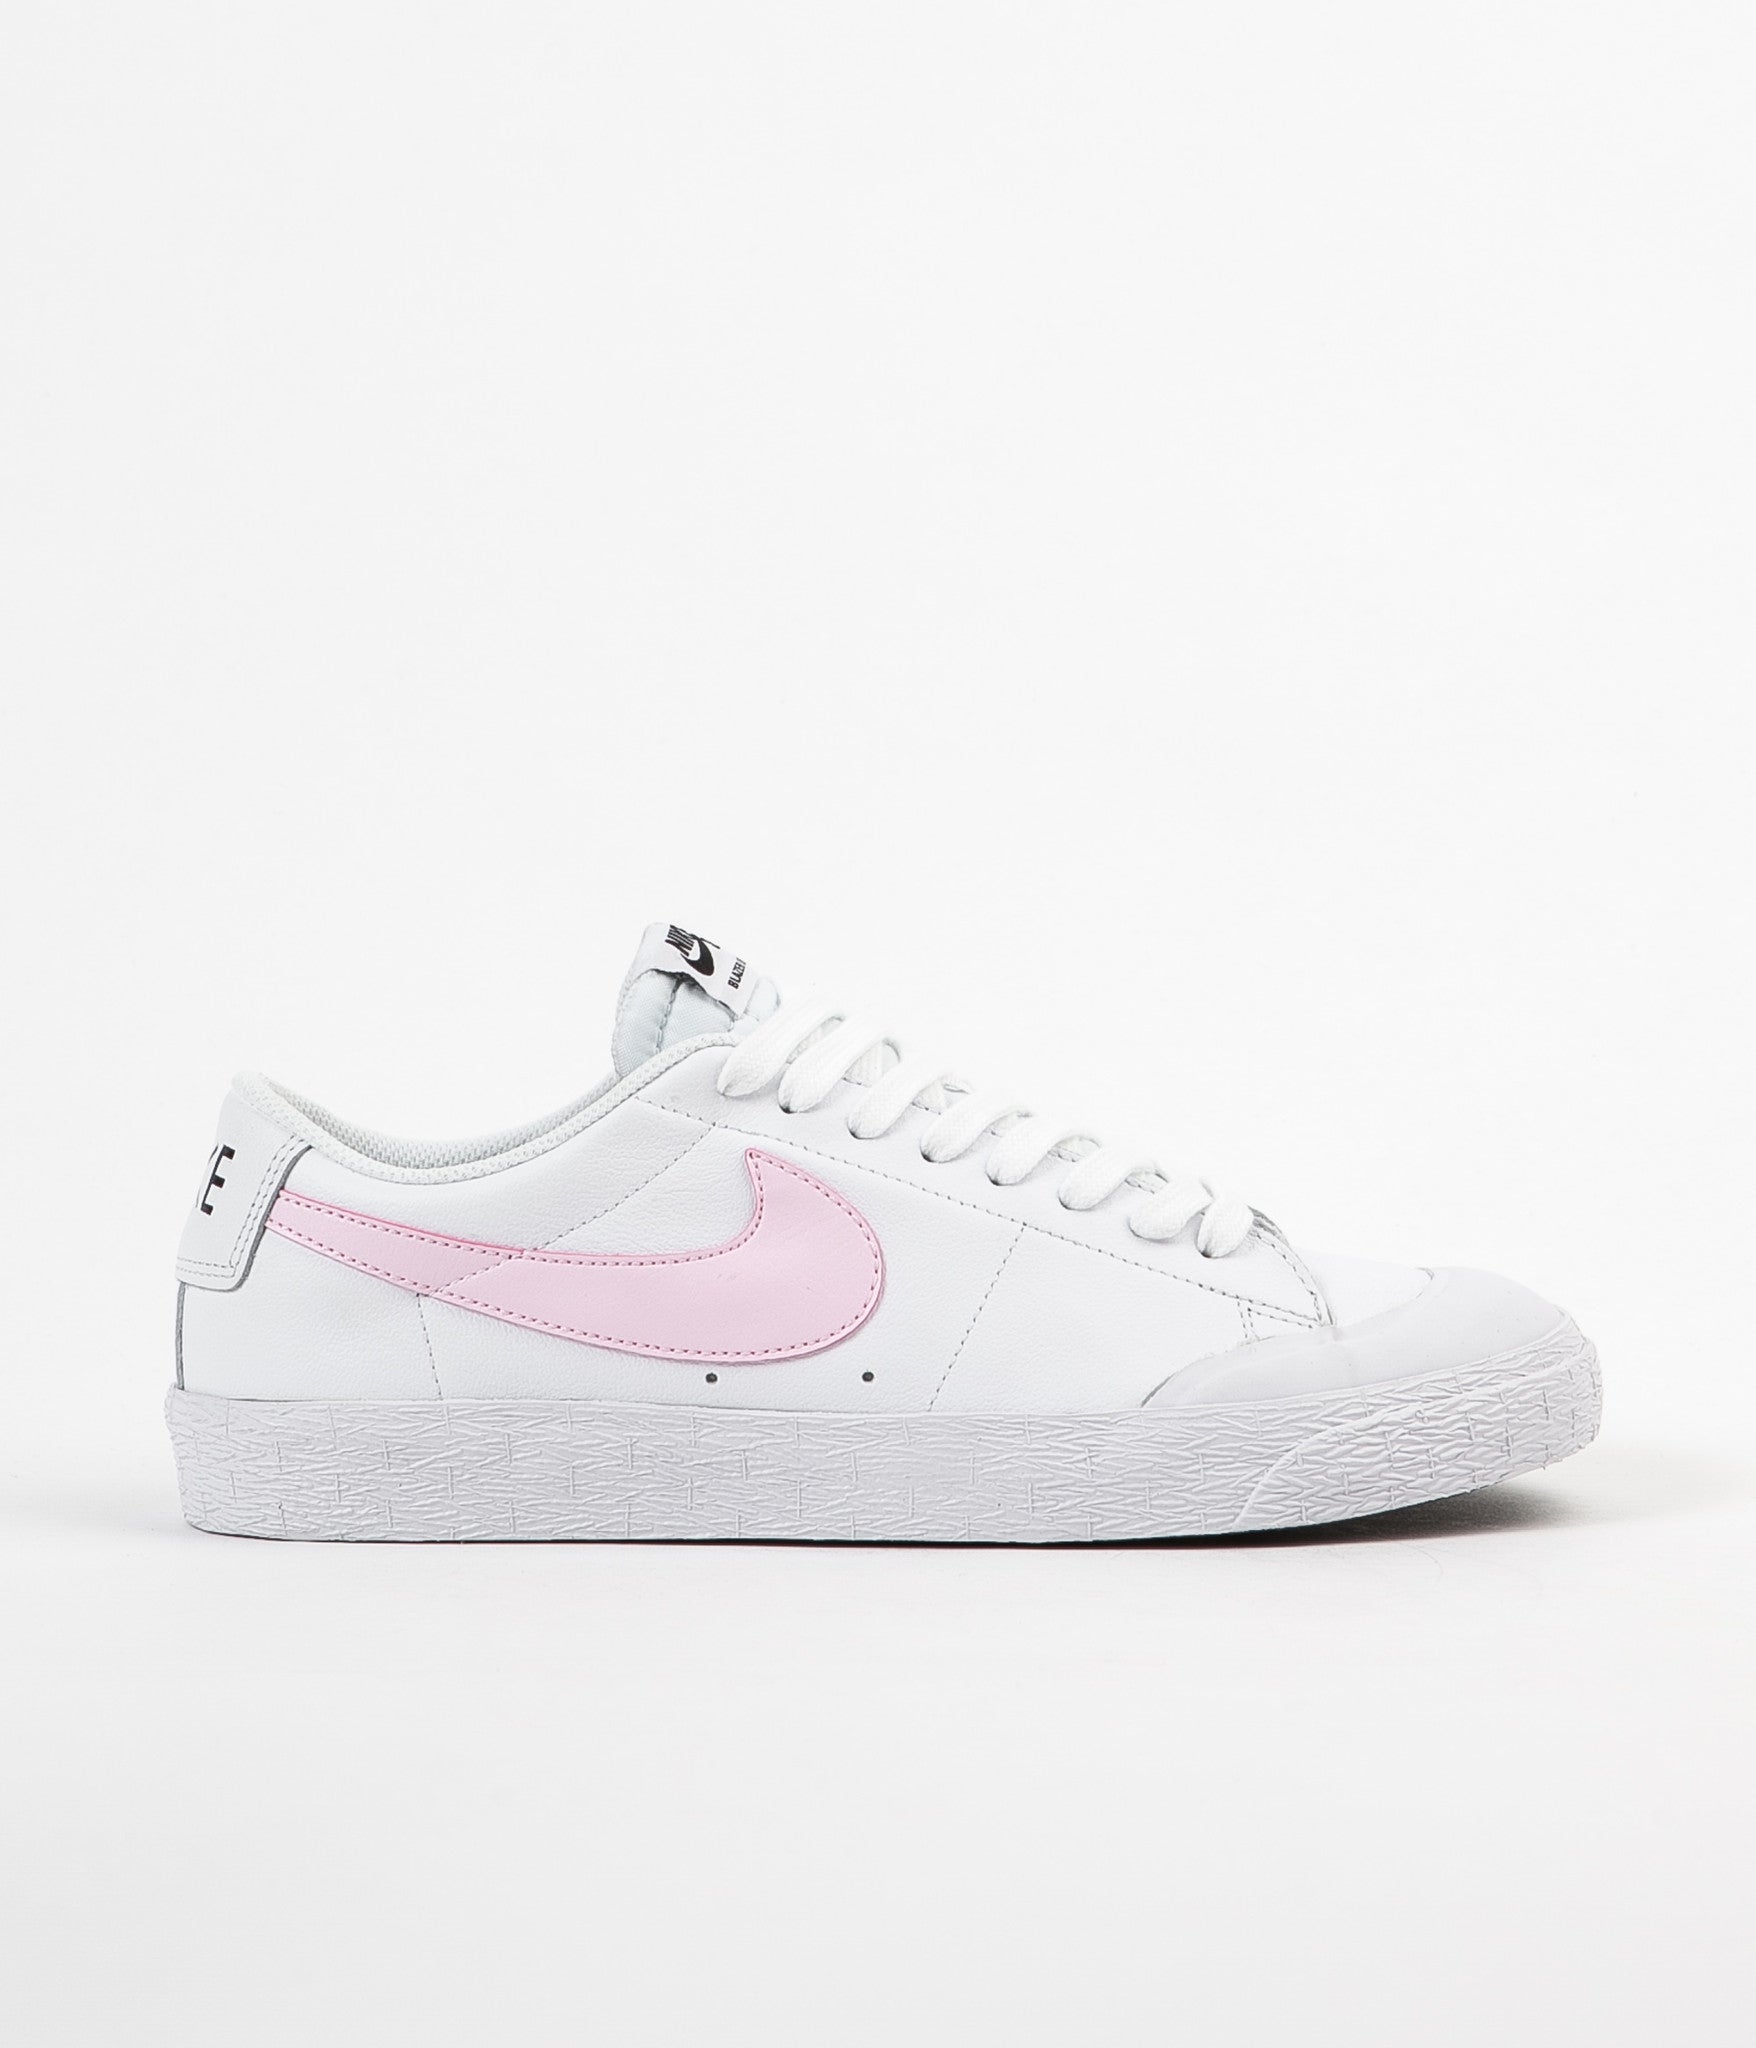 white nikes with pink swoosh